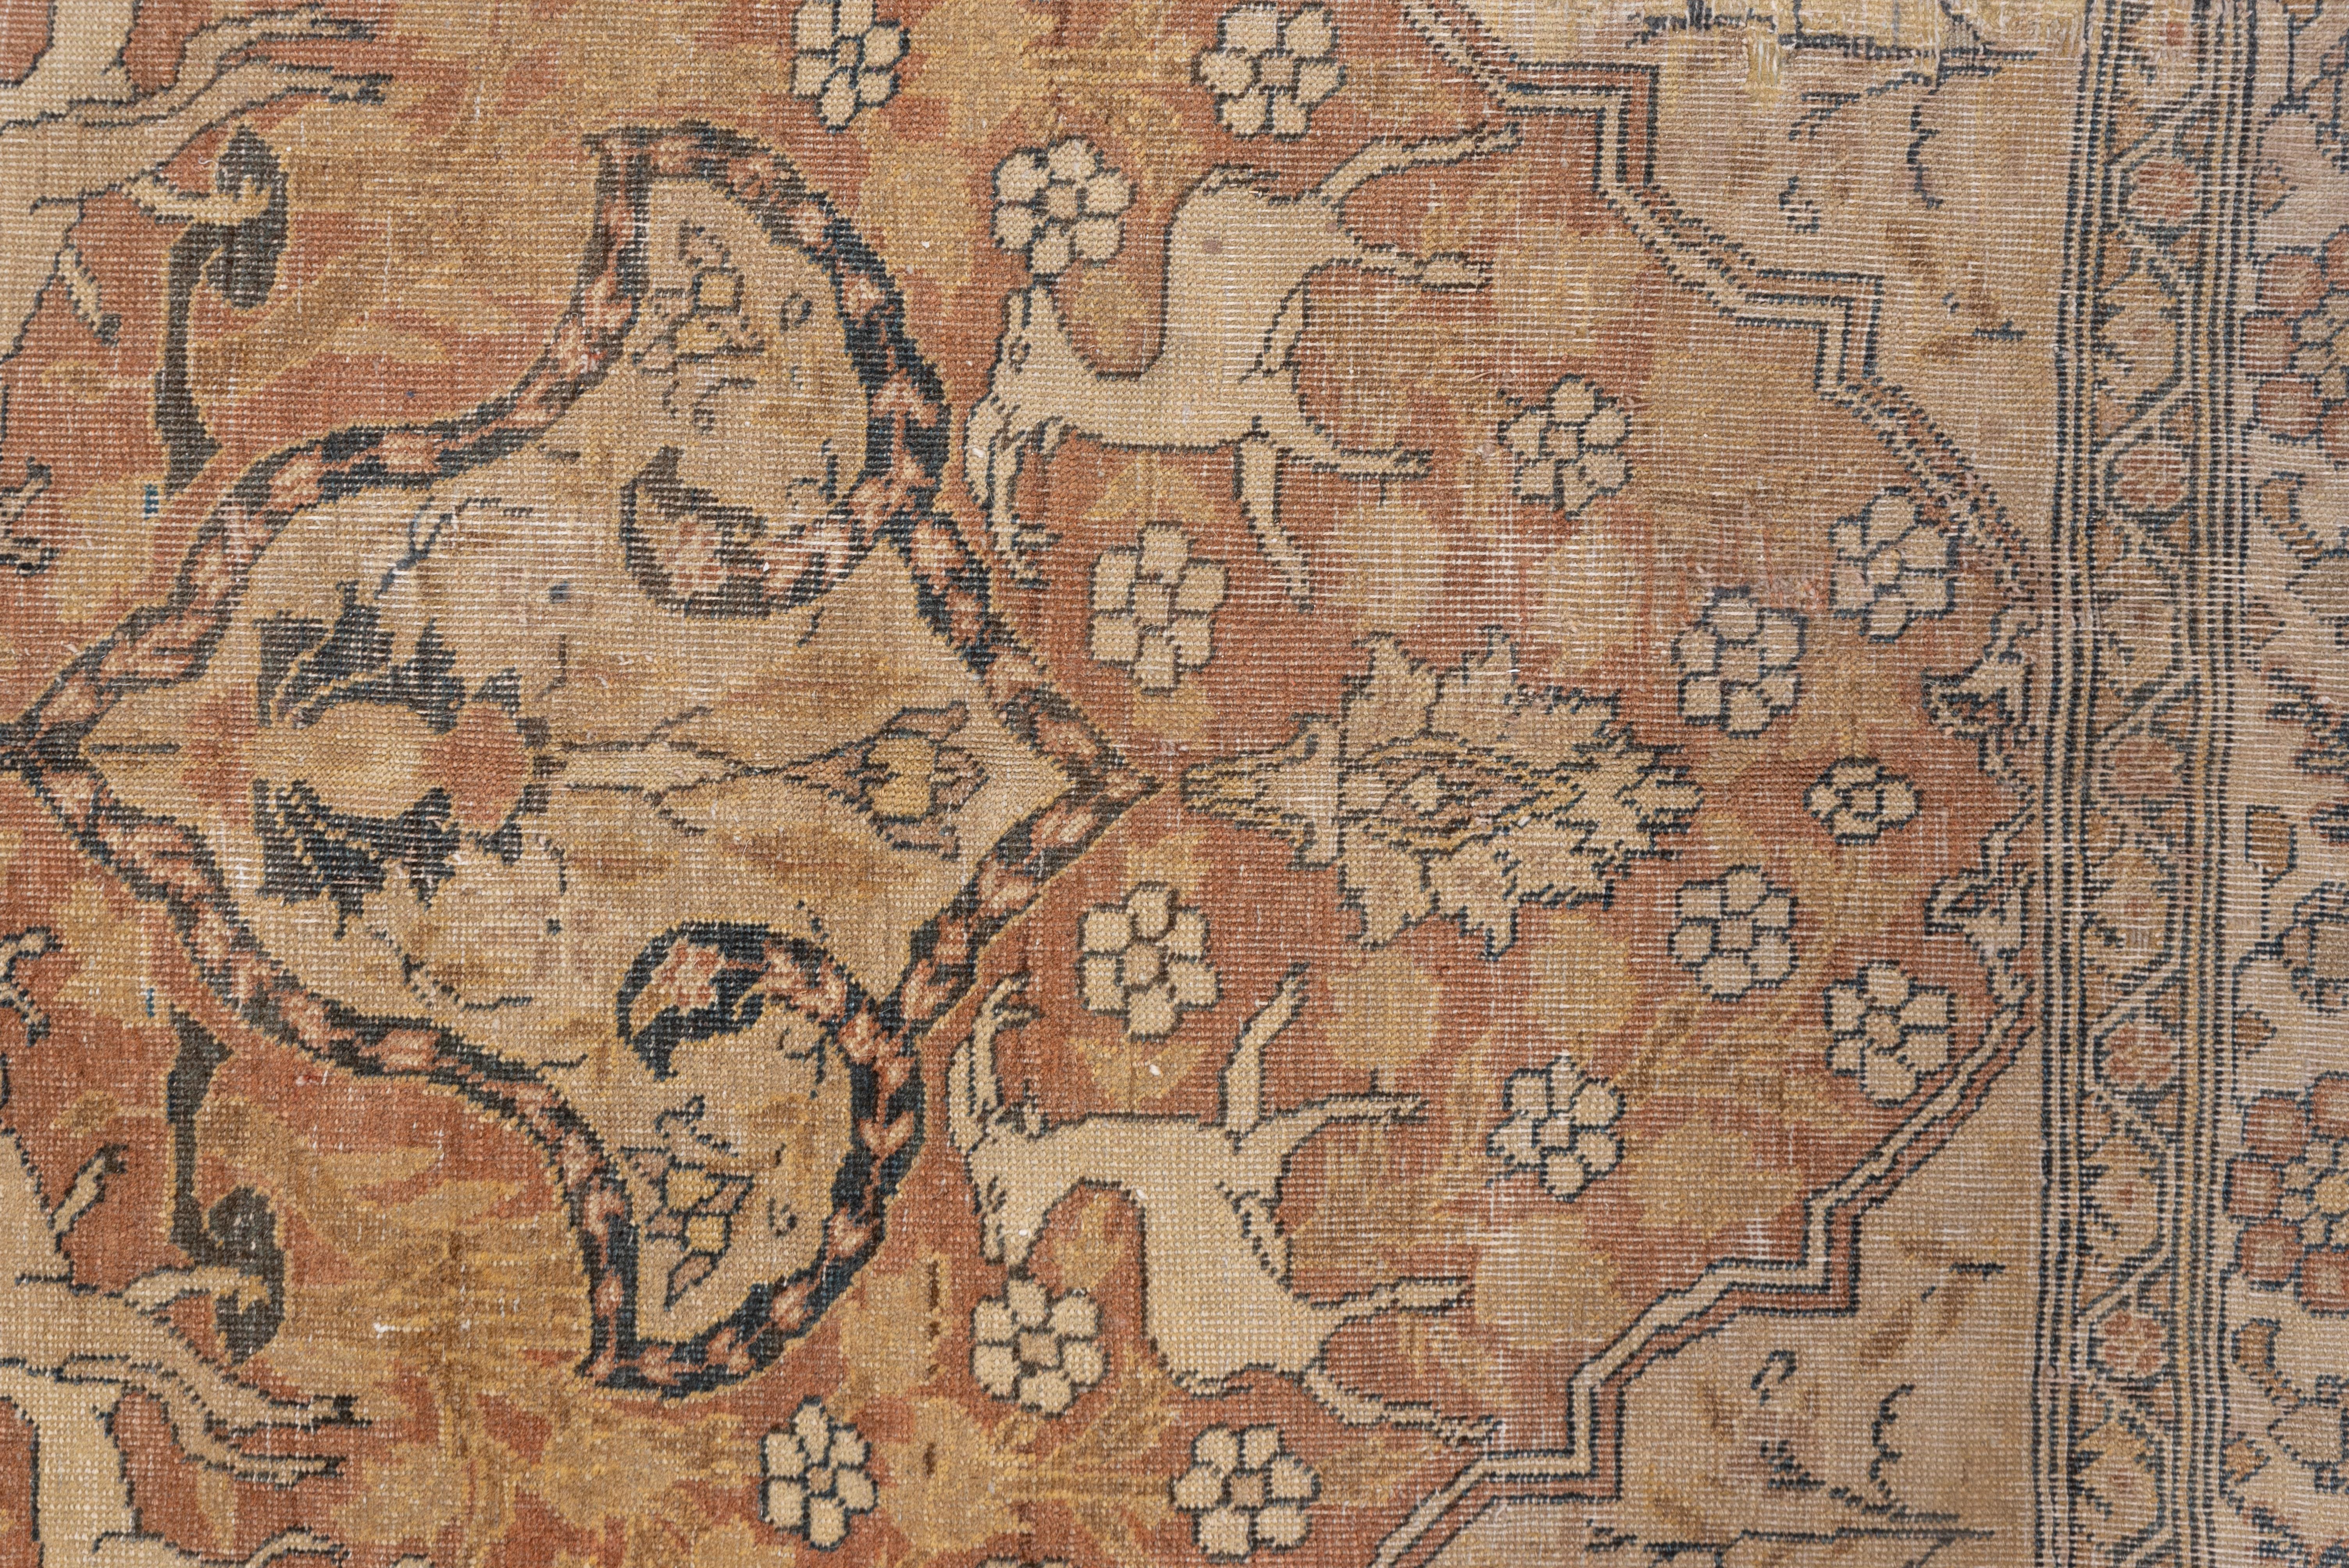 The buff-tan field shows numerous running animals including gazelles, lions and foxes, and the medallion and corners continue the theme. The ivory and taupe main border shows wide reciprocal lappets. Trees with red flowers grow in the four corners